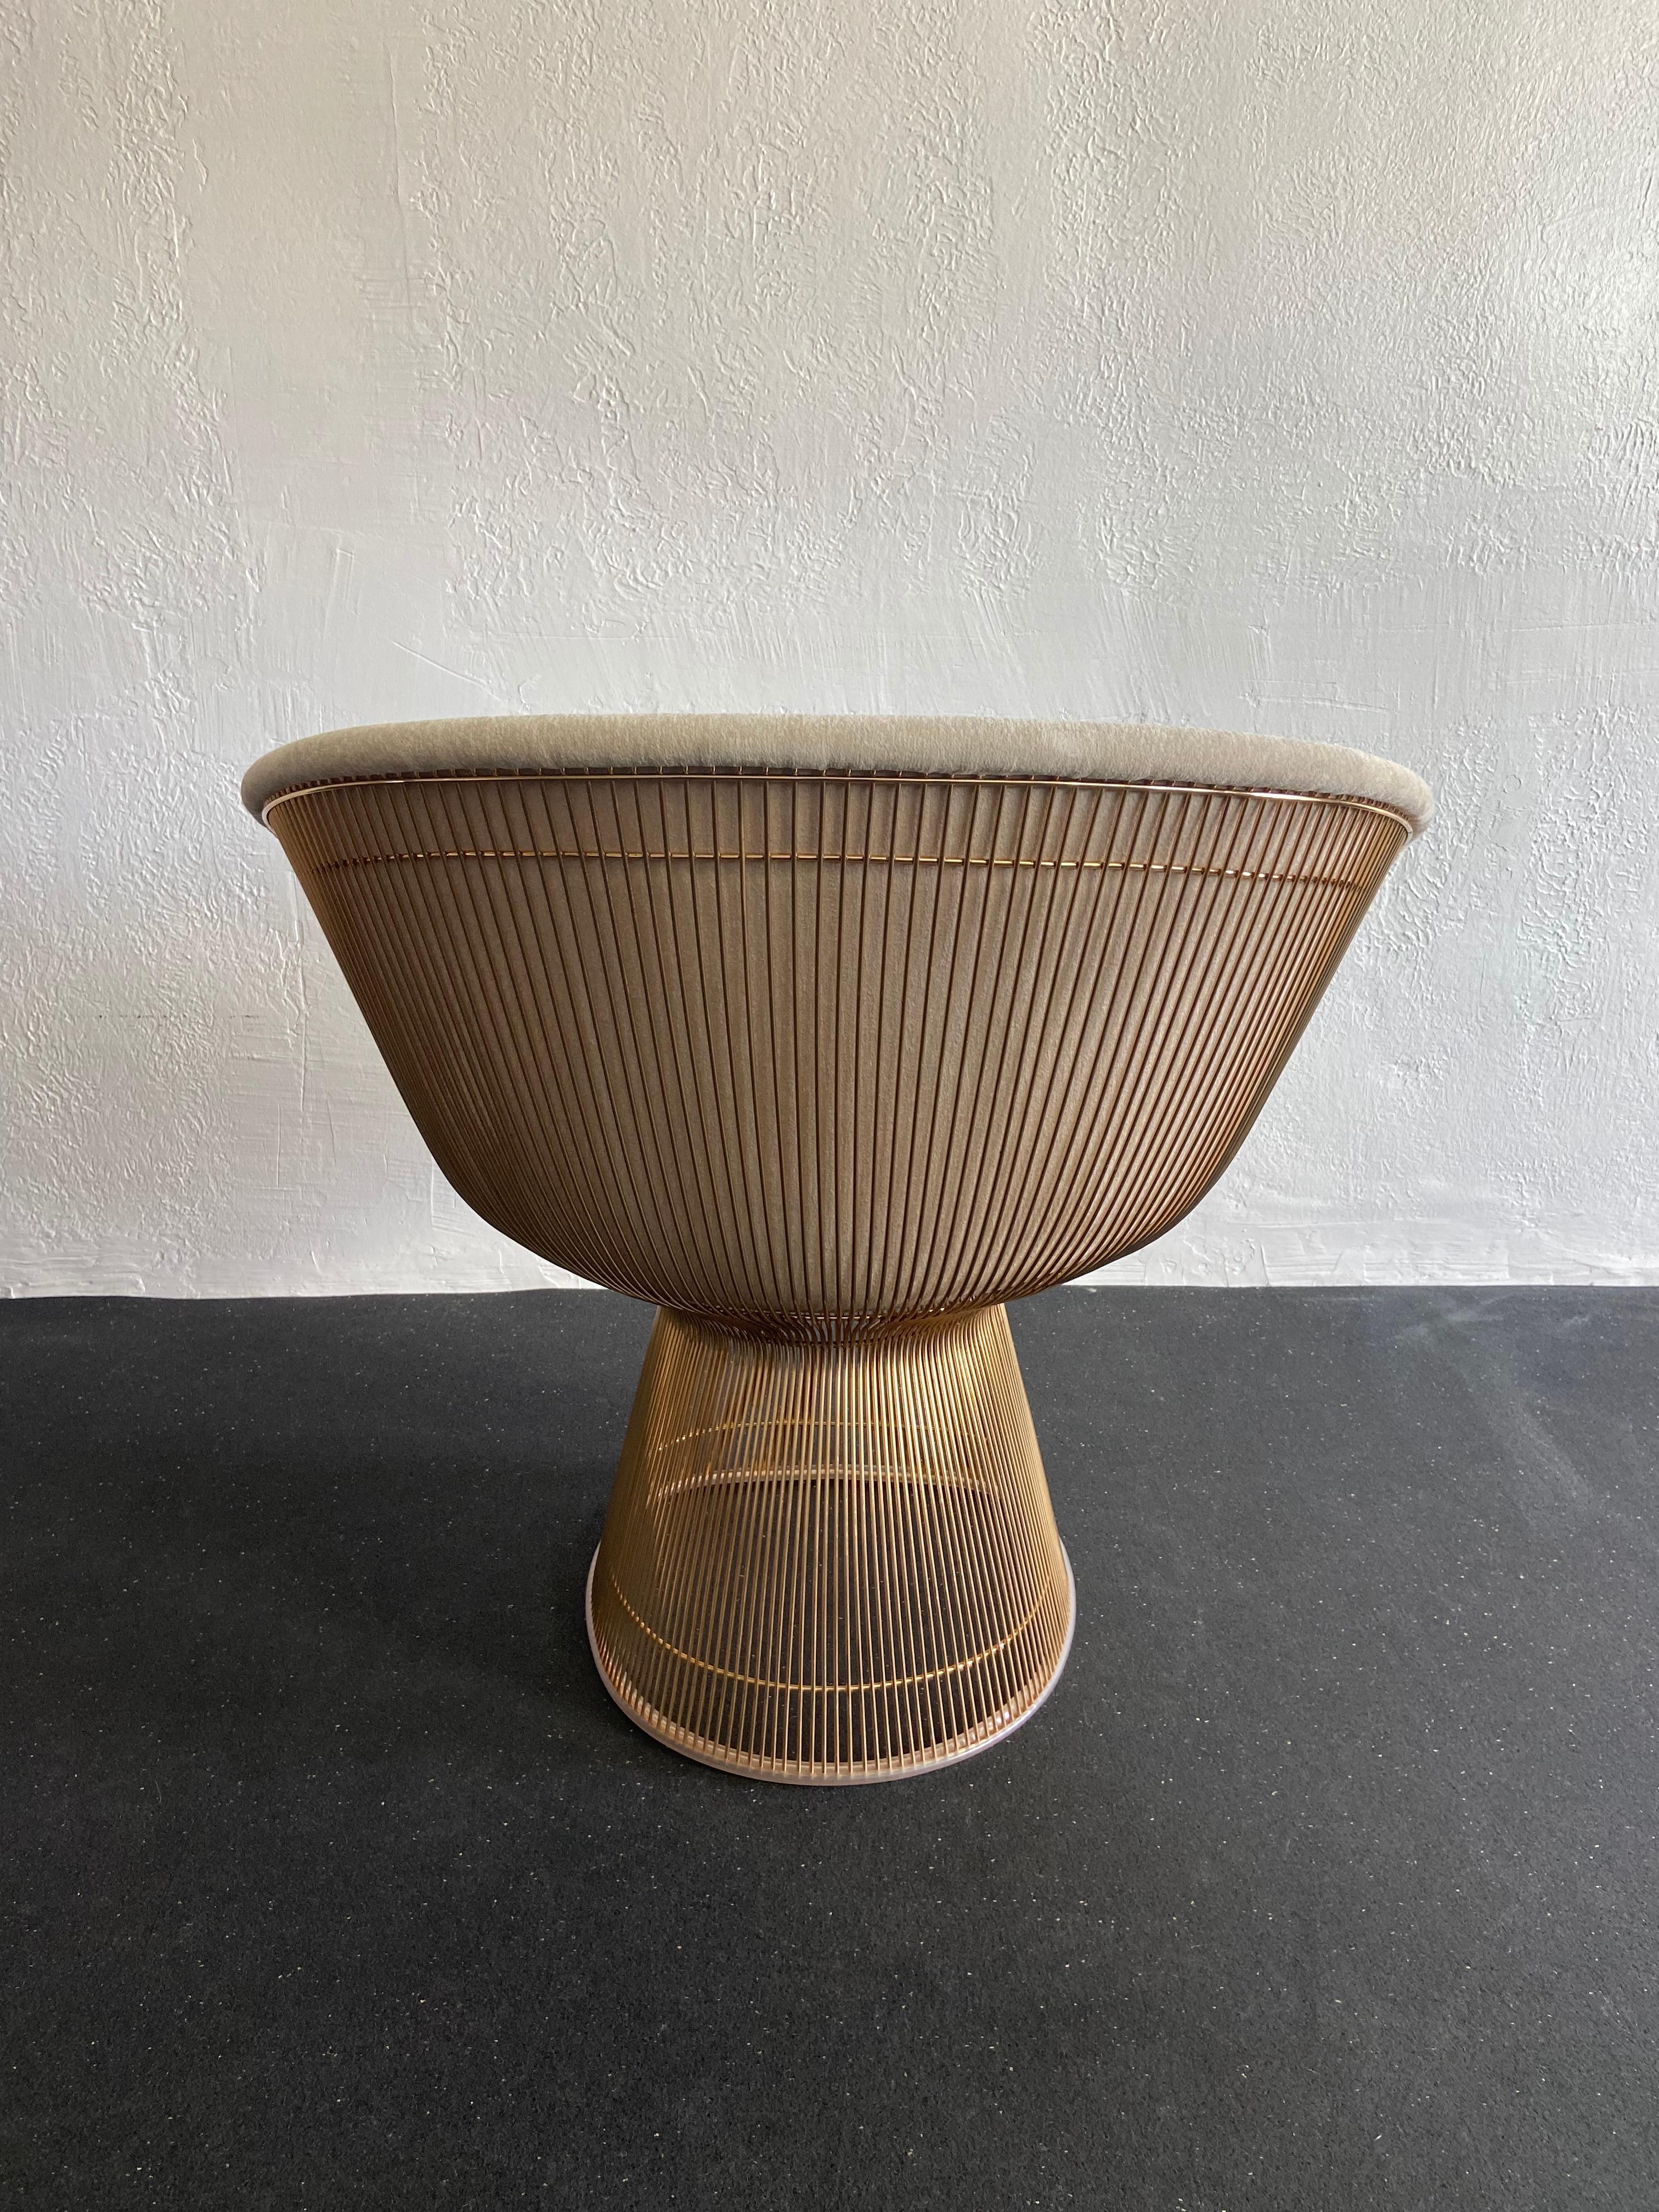 American Warren Platner for Knoll Gold Wire Lounge Chair